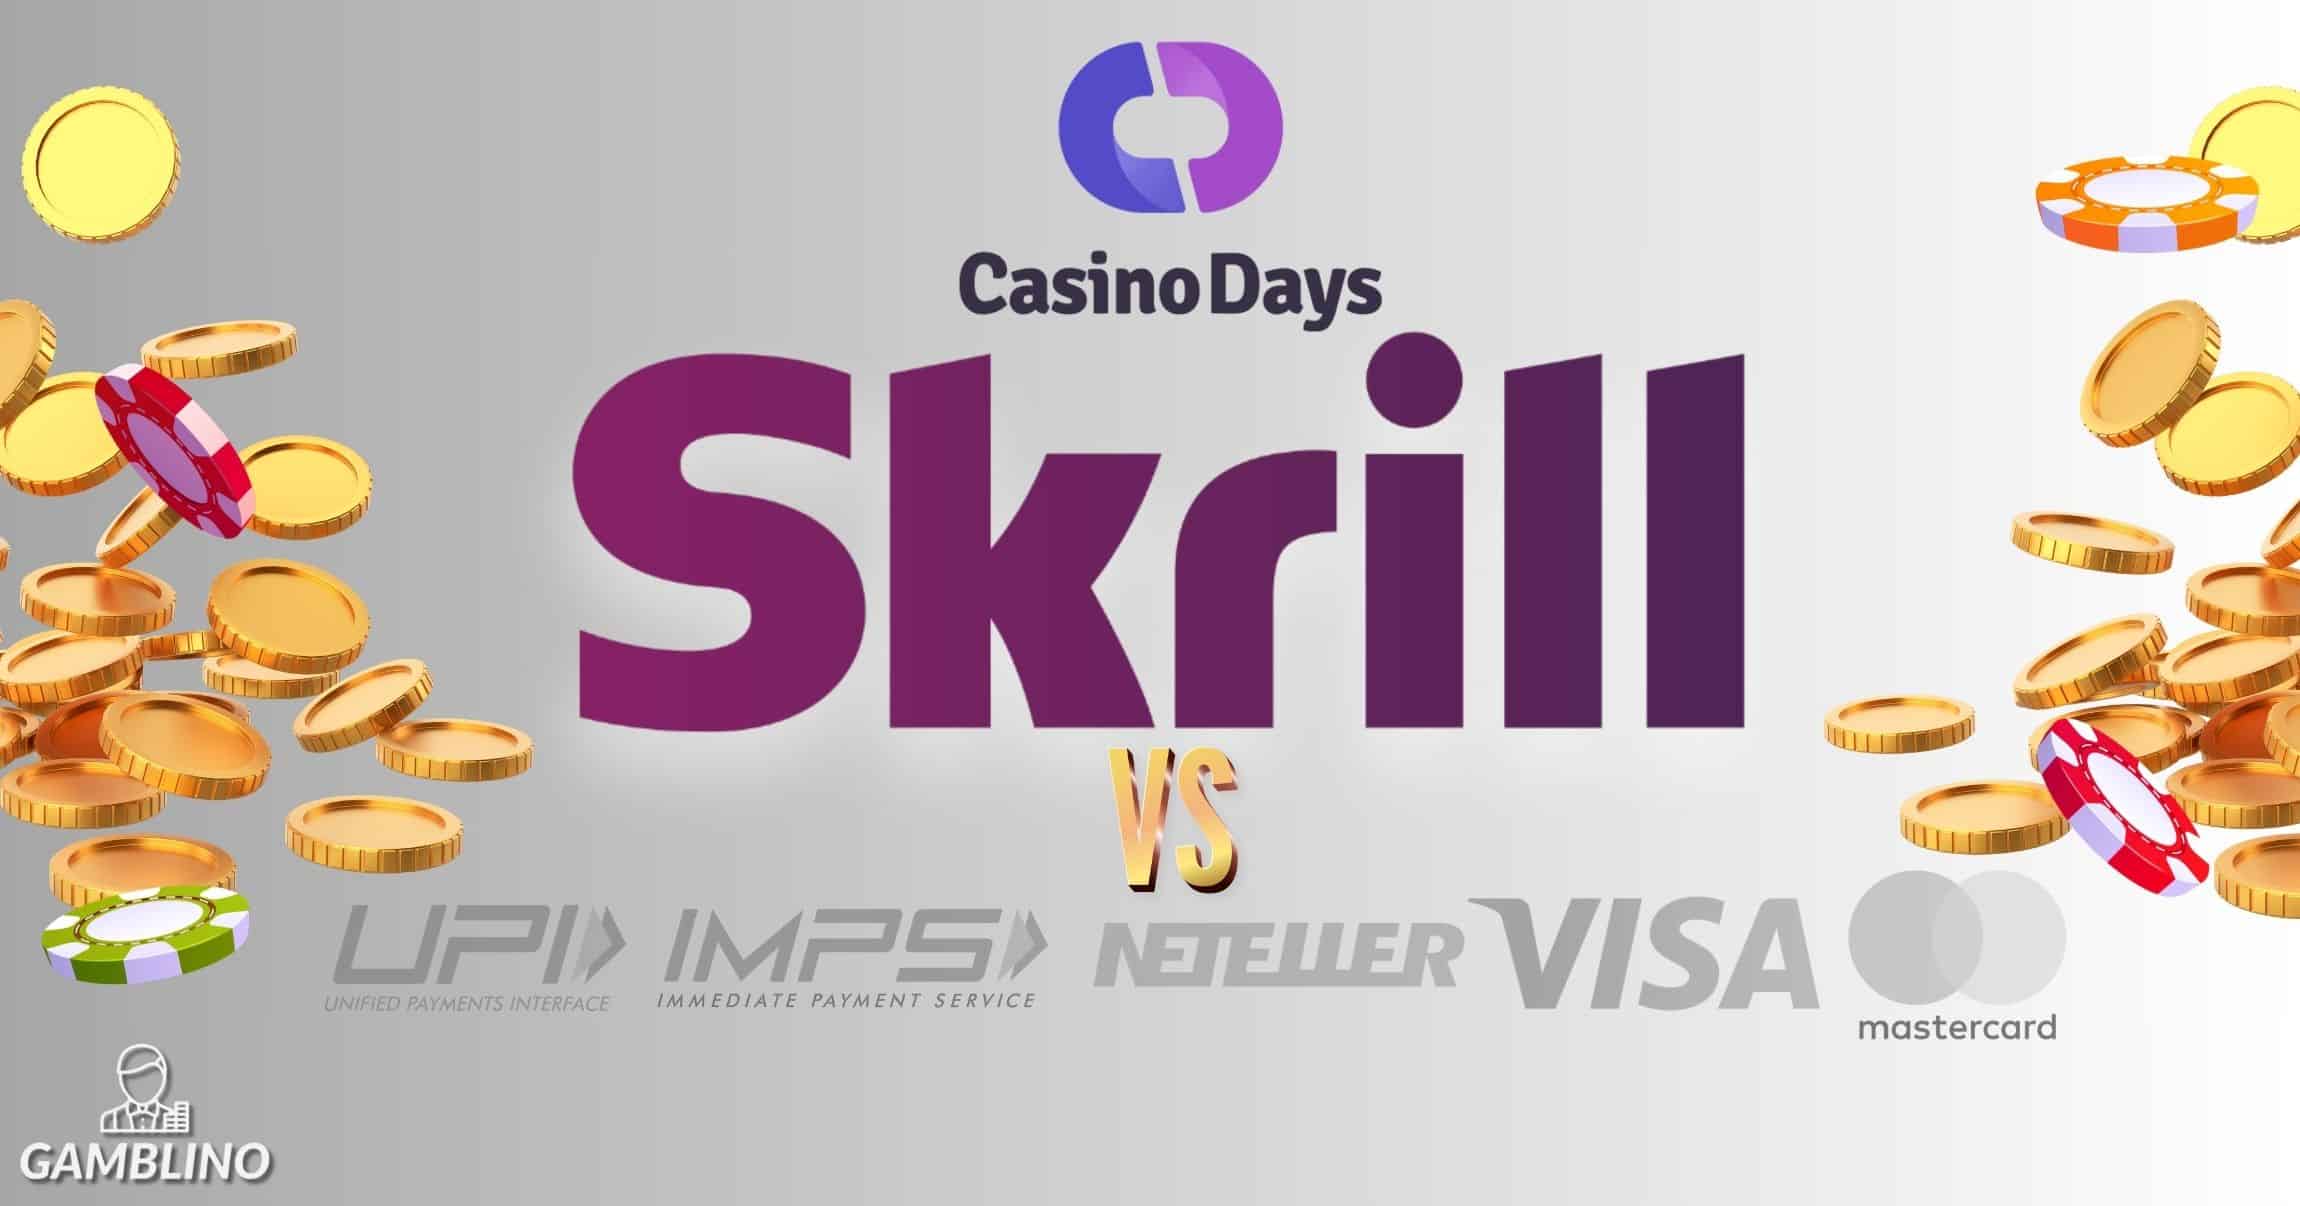 comparison of skrill and other casino days payment method